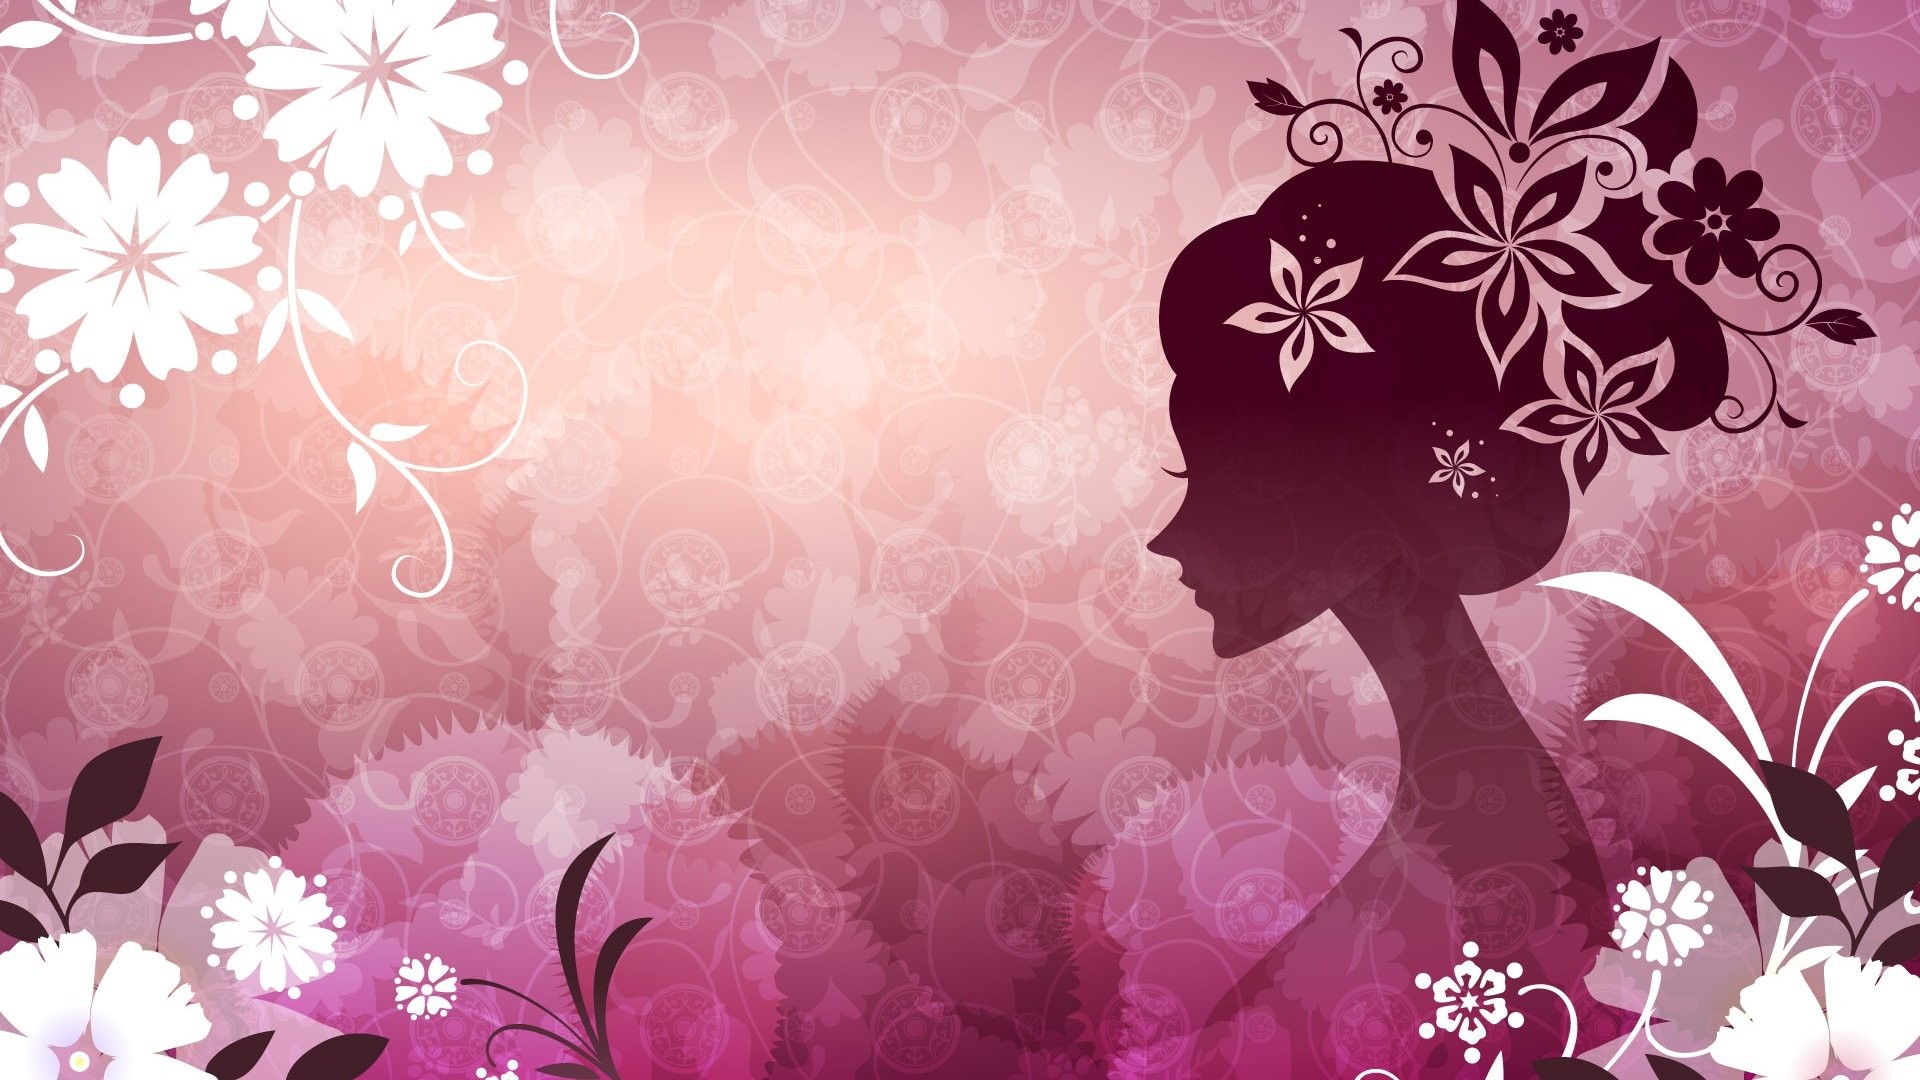 1920x1080 Vector Girl 476687. SHARE. TAGS: Themes Theme Desktop Woman Vector Pink  Flowers